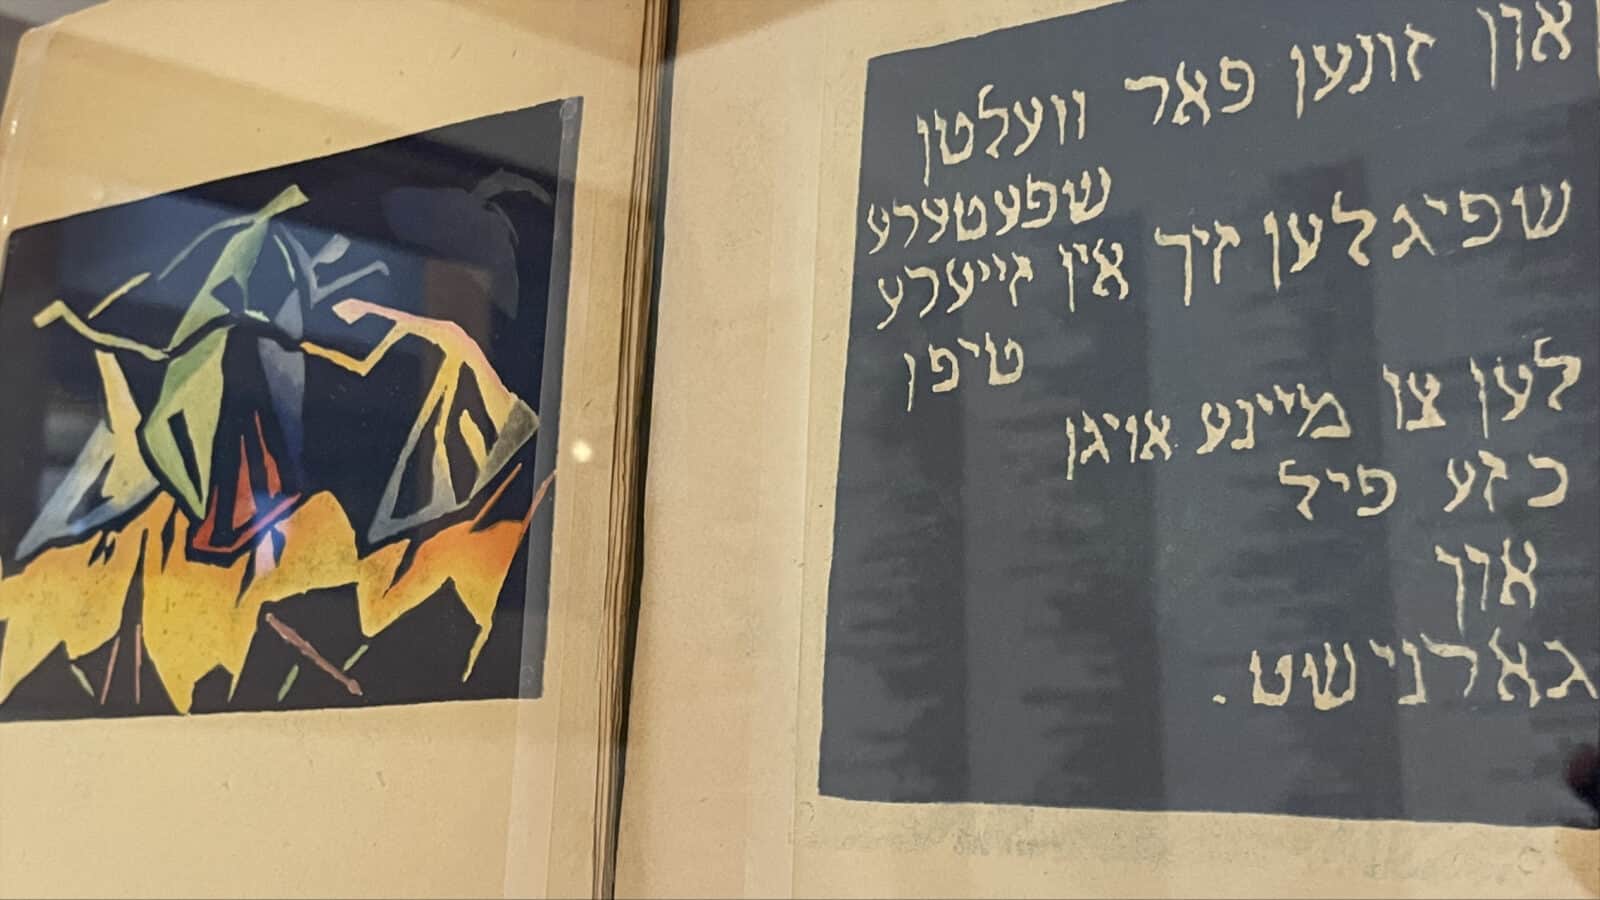 Esther Carp, Dina Matus and Ida Boymer published hand-colored books in Yiddish and German. Press photo courtesy of the Yiddish Book Center